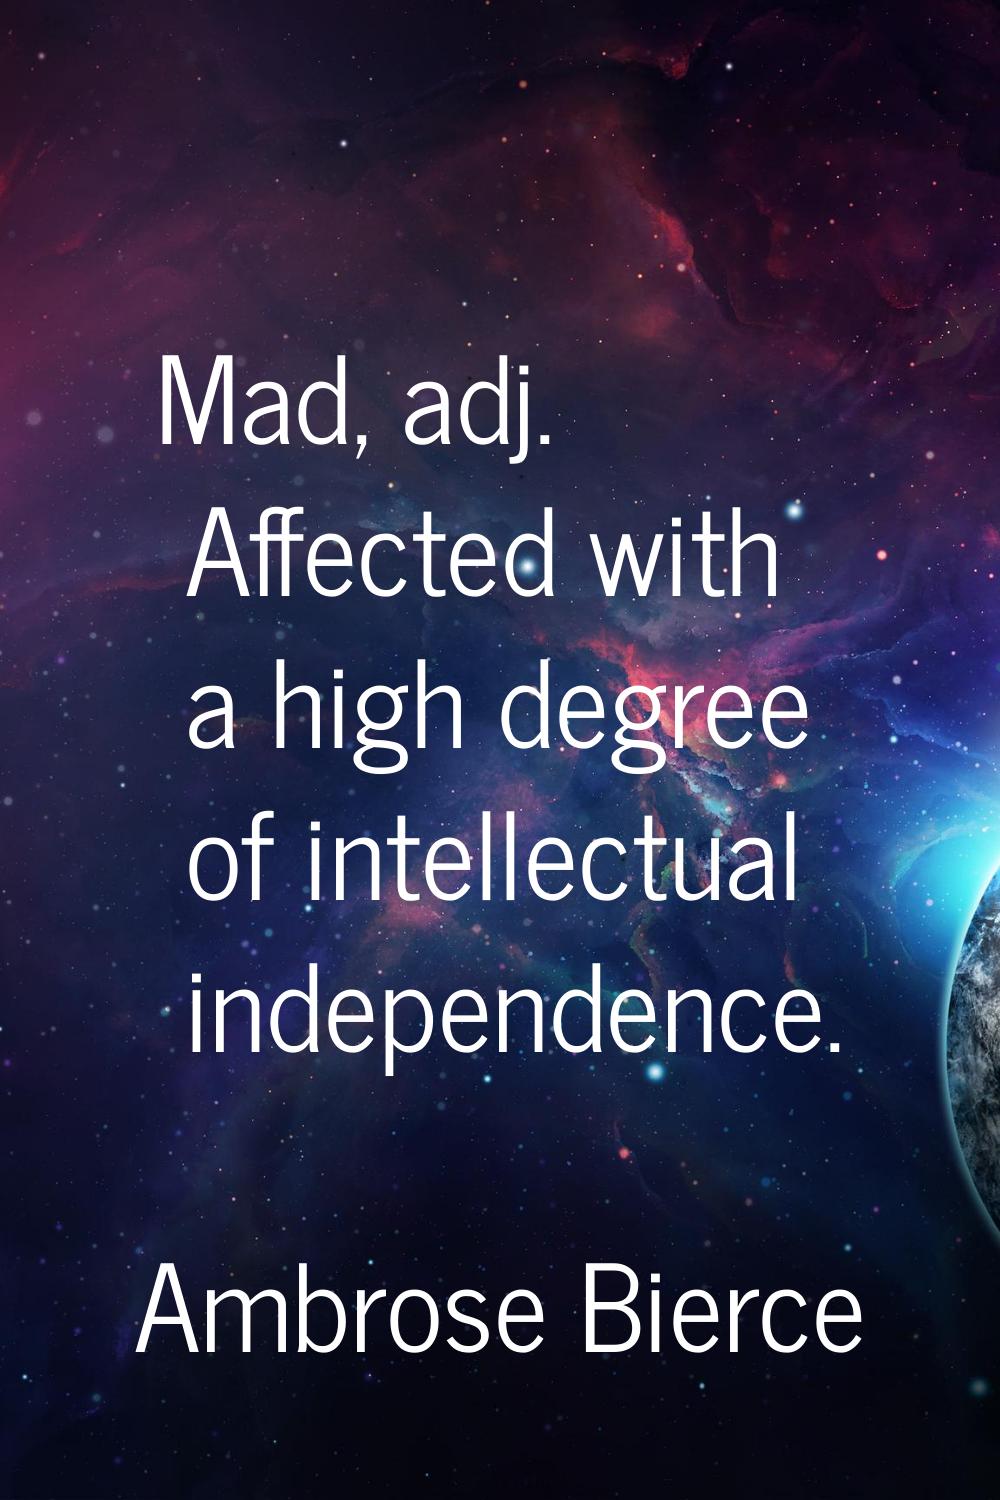 Mad, adj. Affected with a high degree of intellectual independence.